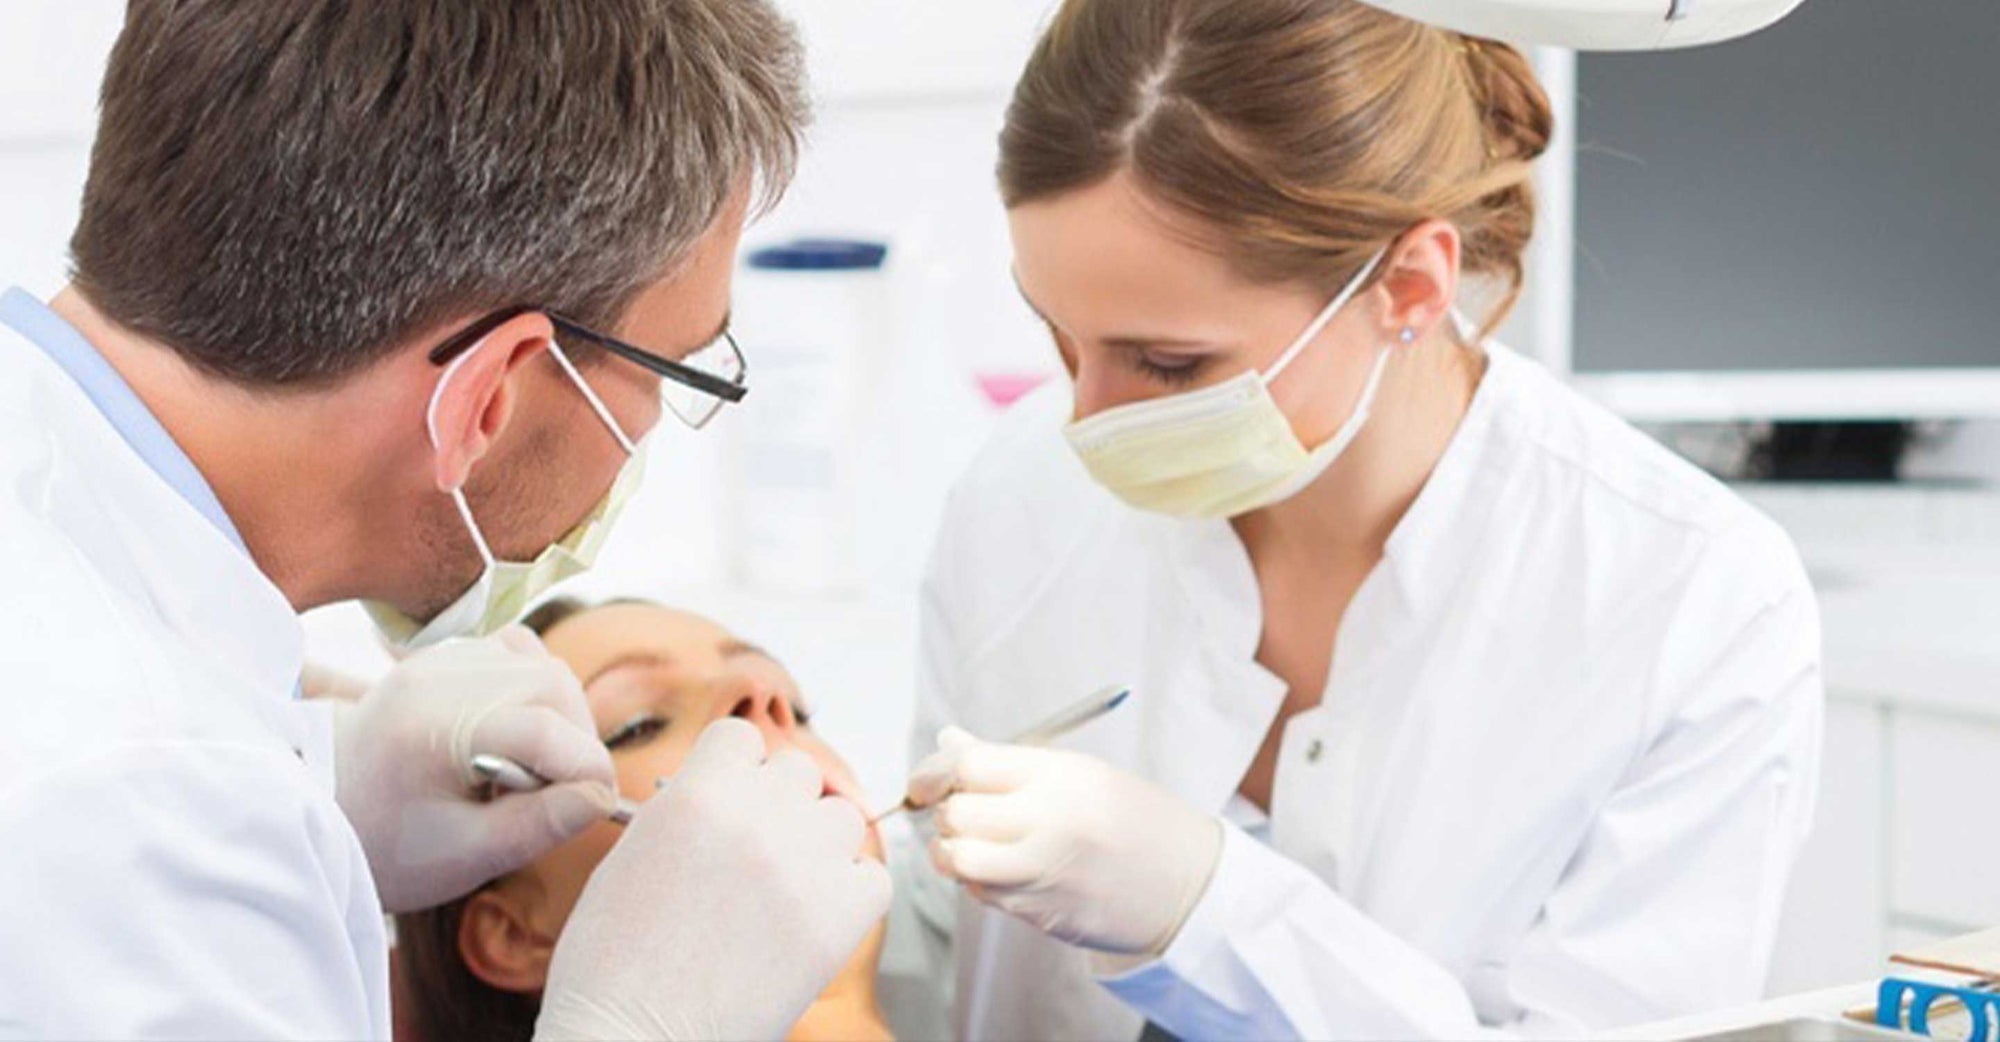 How to control mercury vapor in the dental office